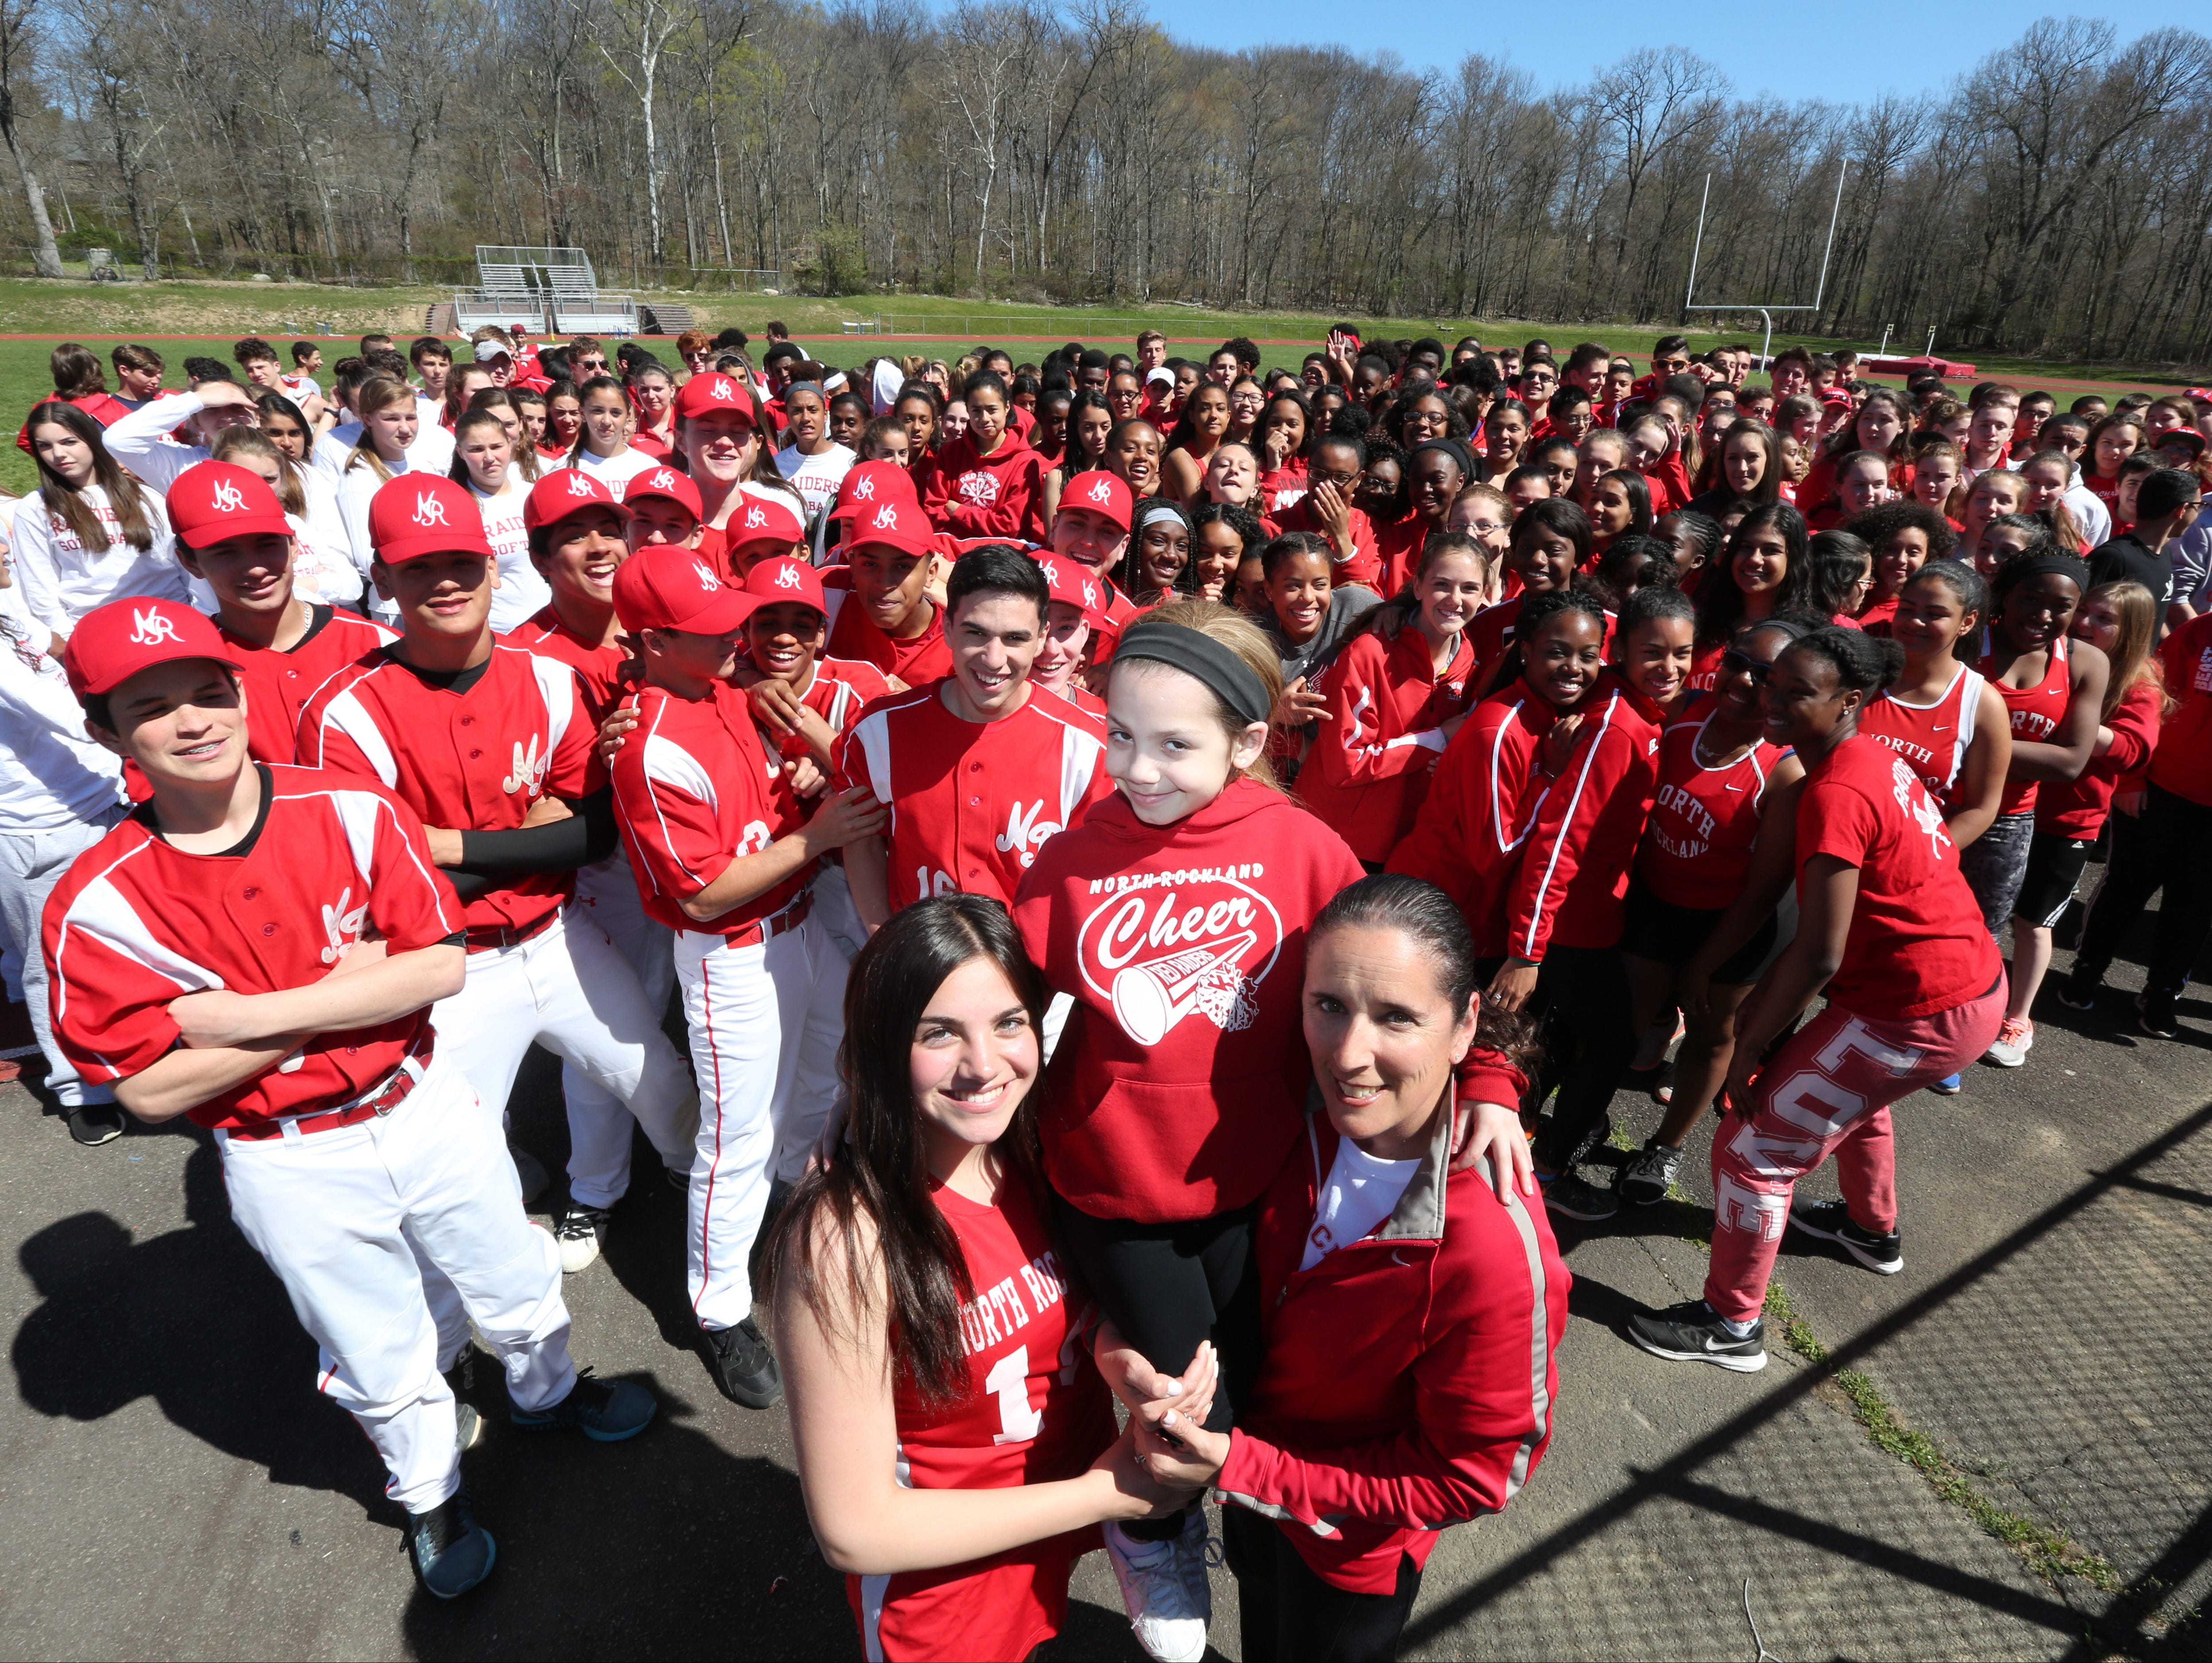 Athletes gather behind Stony Point Elementary third-grader Gabby DiCarlo, who is being held up by her sister, Isabella DiCarlo and Jennifer LaBier, Stony Point Elementary teacher and high school tennis coach, at North Rockland High School April 20, 2016. They got together to spread the word about the second annual "Sports Day" at the high school on April 30. So far they have raised $14,000 for cancer and cystic fibrosis.